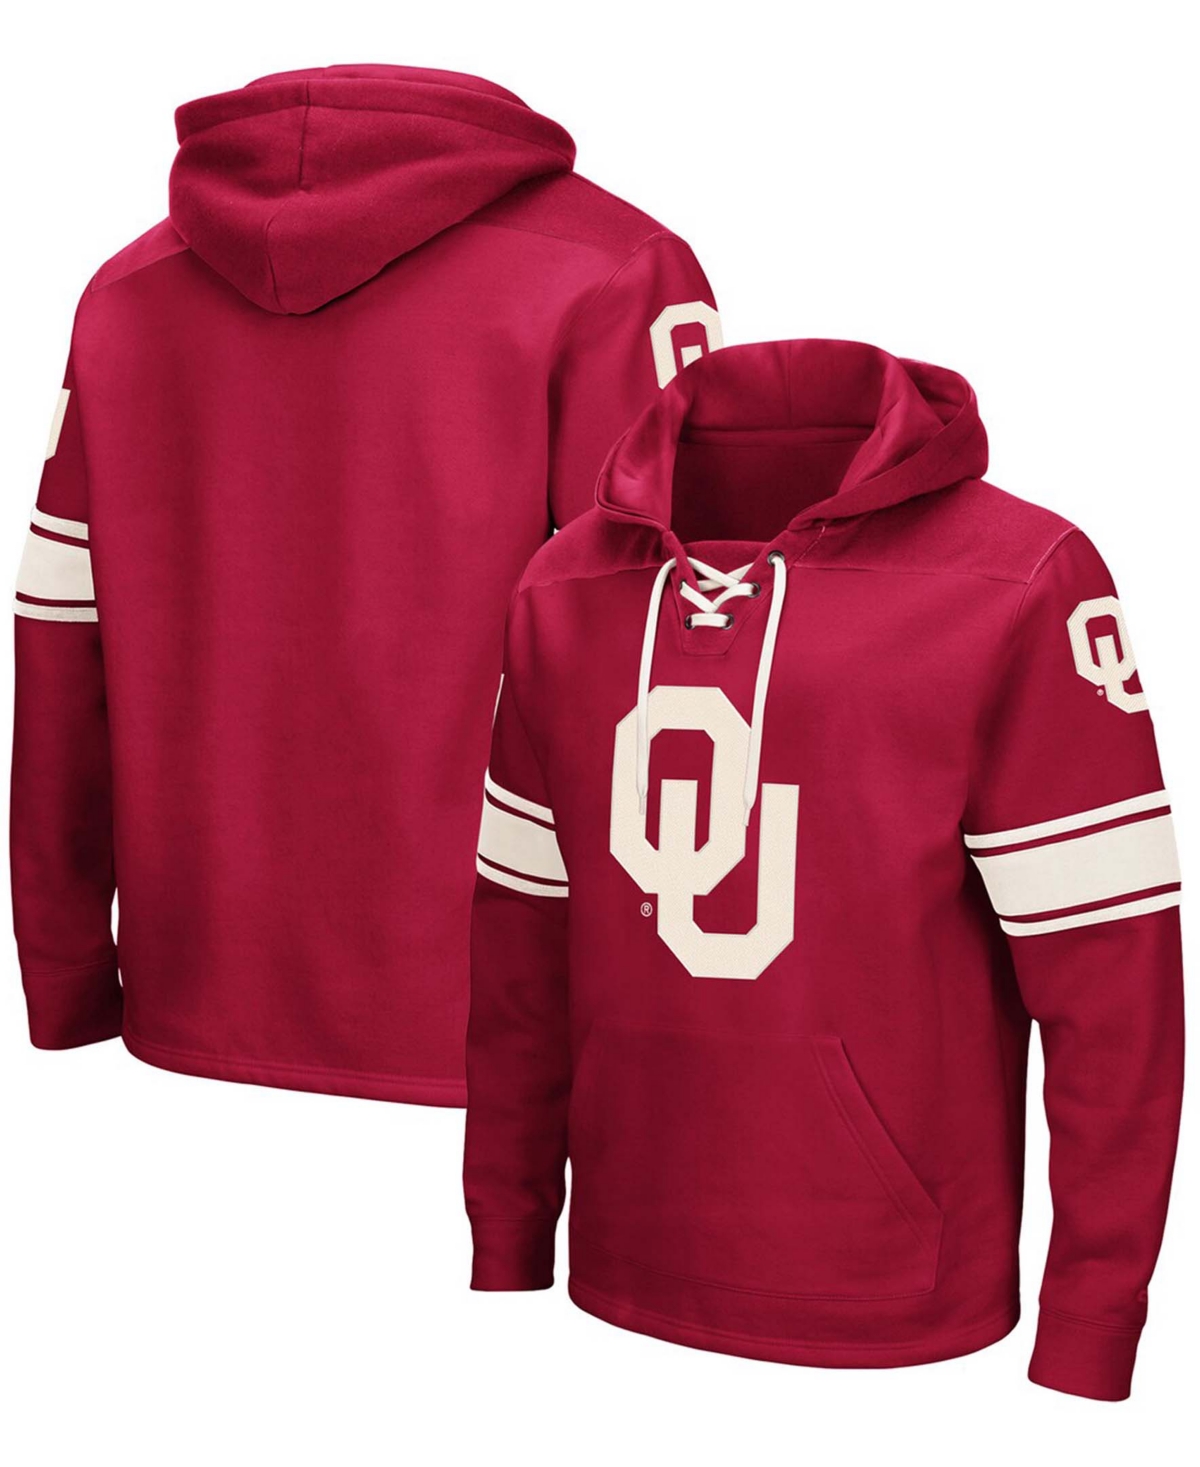 Colosseum Men's Crimson Oklahoma Sooners 2.0 Lace-up Pullover Hoodie